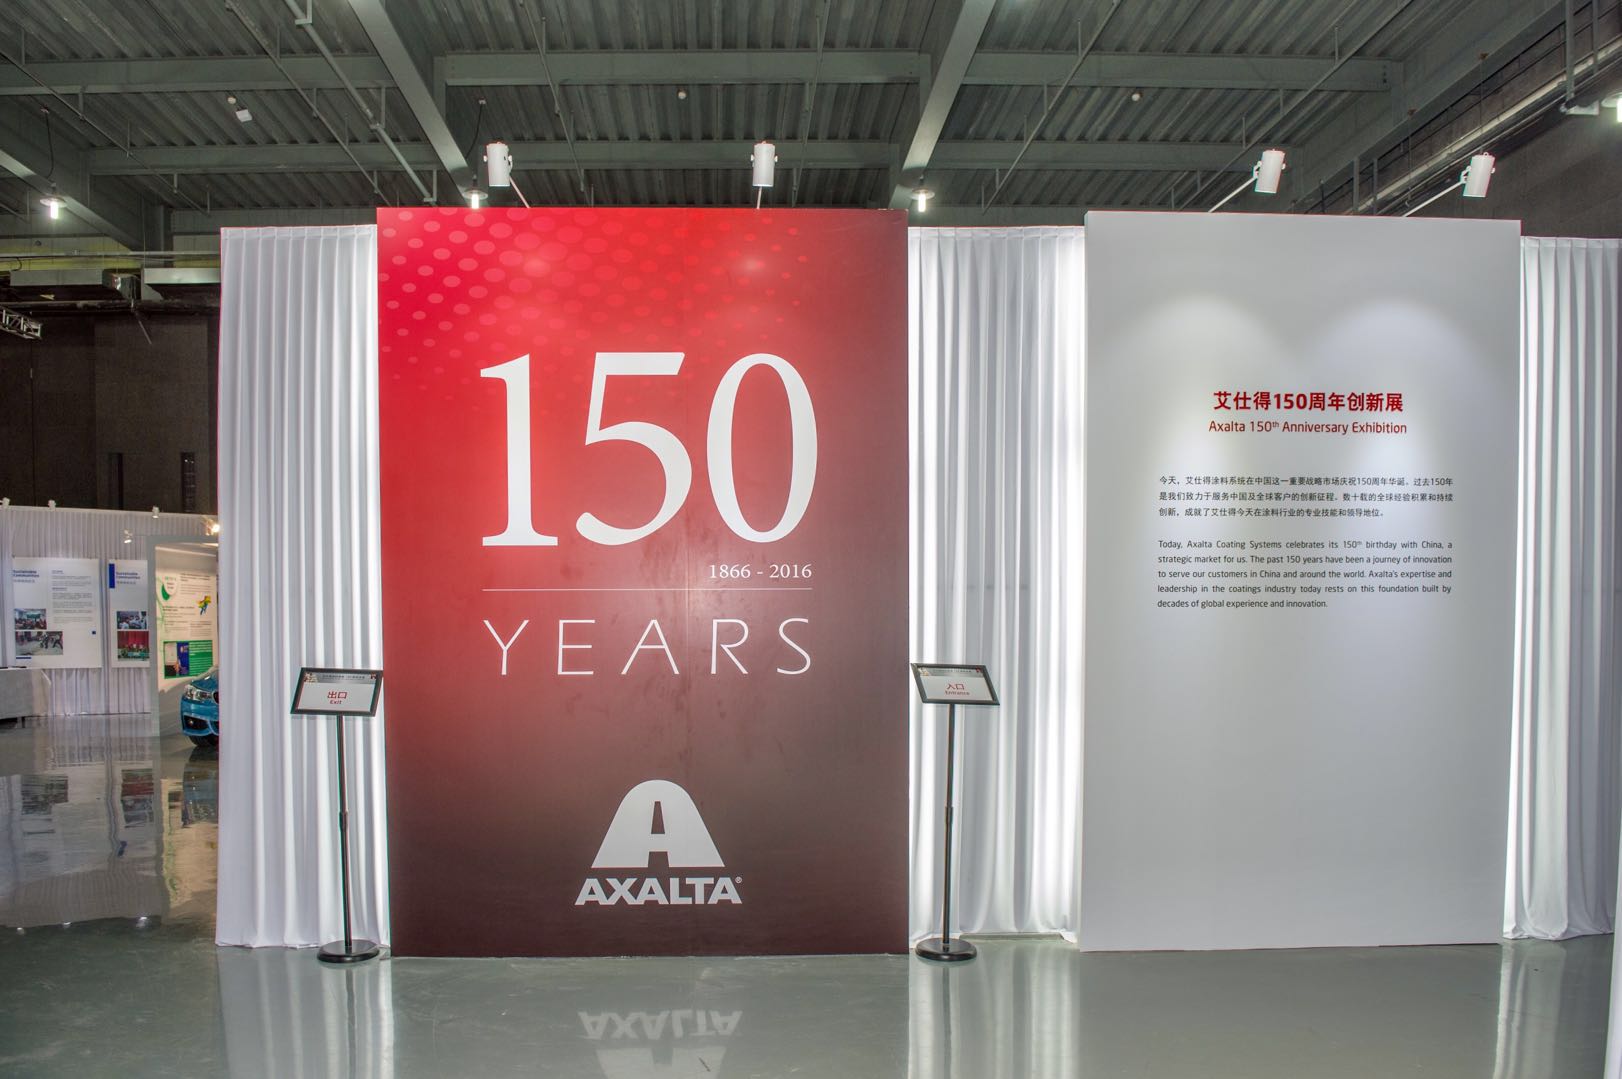 In China, Axalta created an exhibit for a day-long anniversary celebration with employees, customers and members of the community.